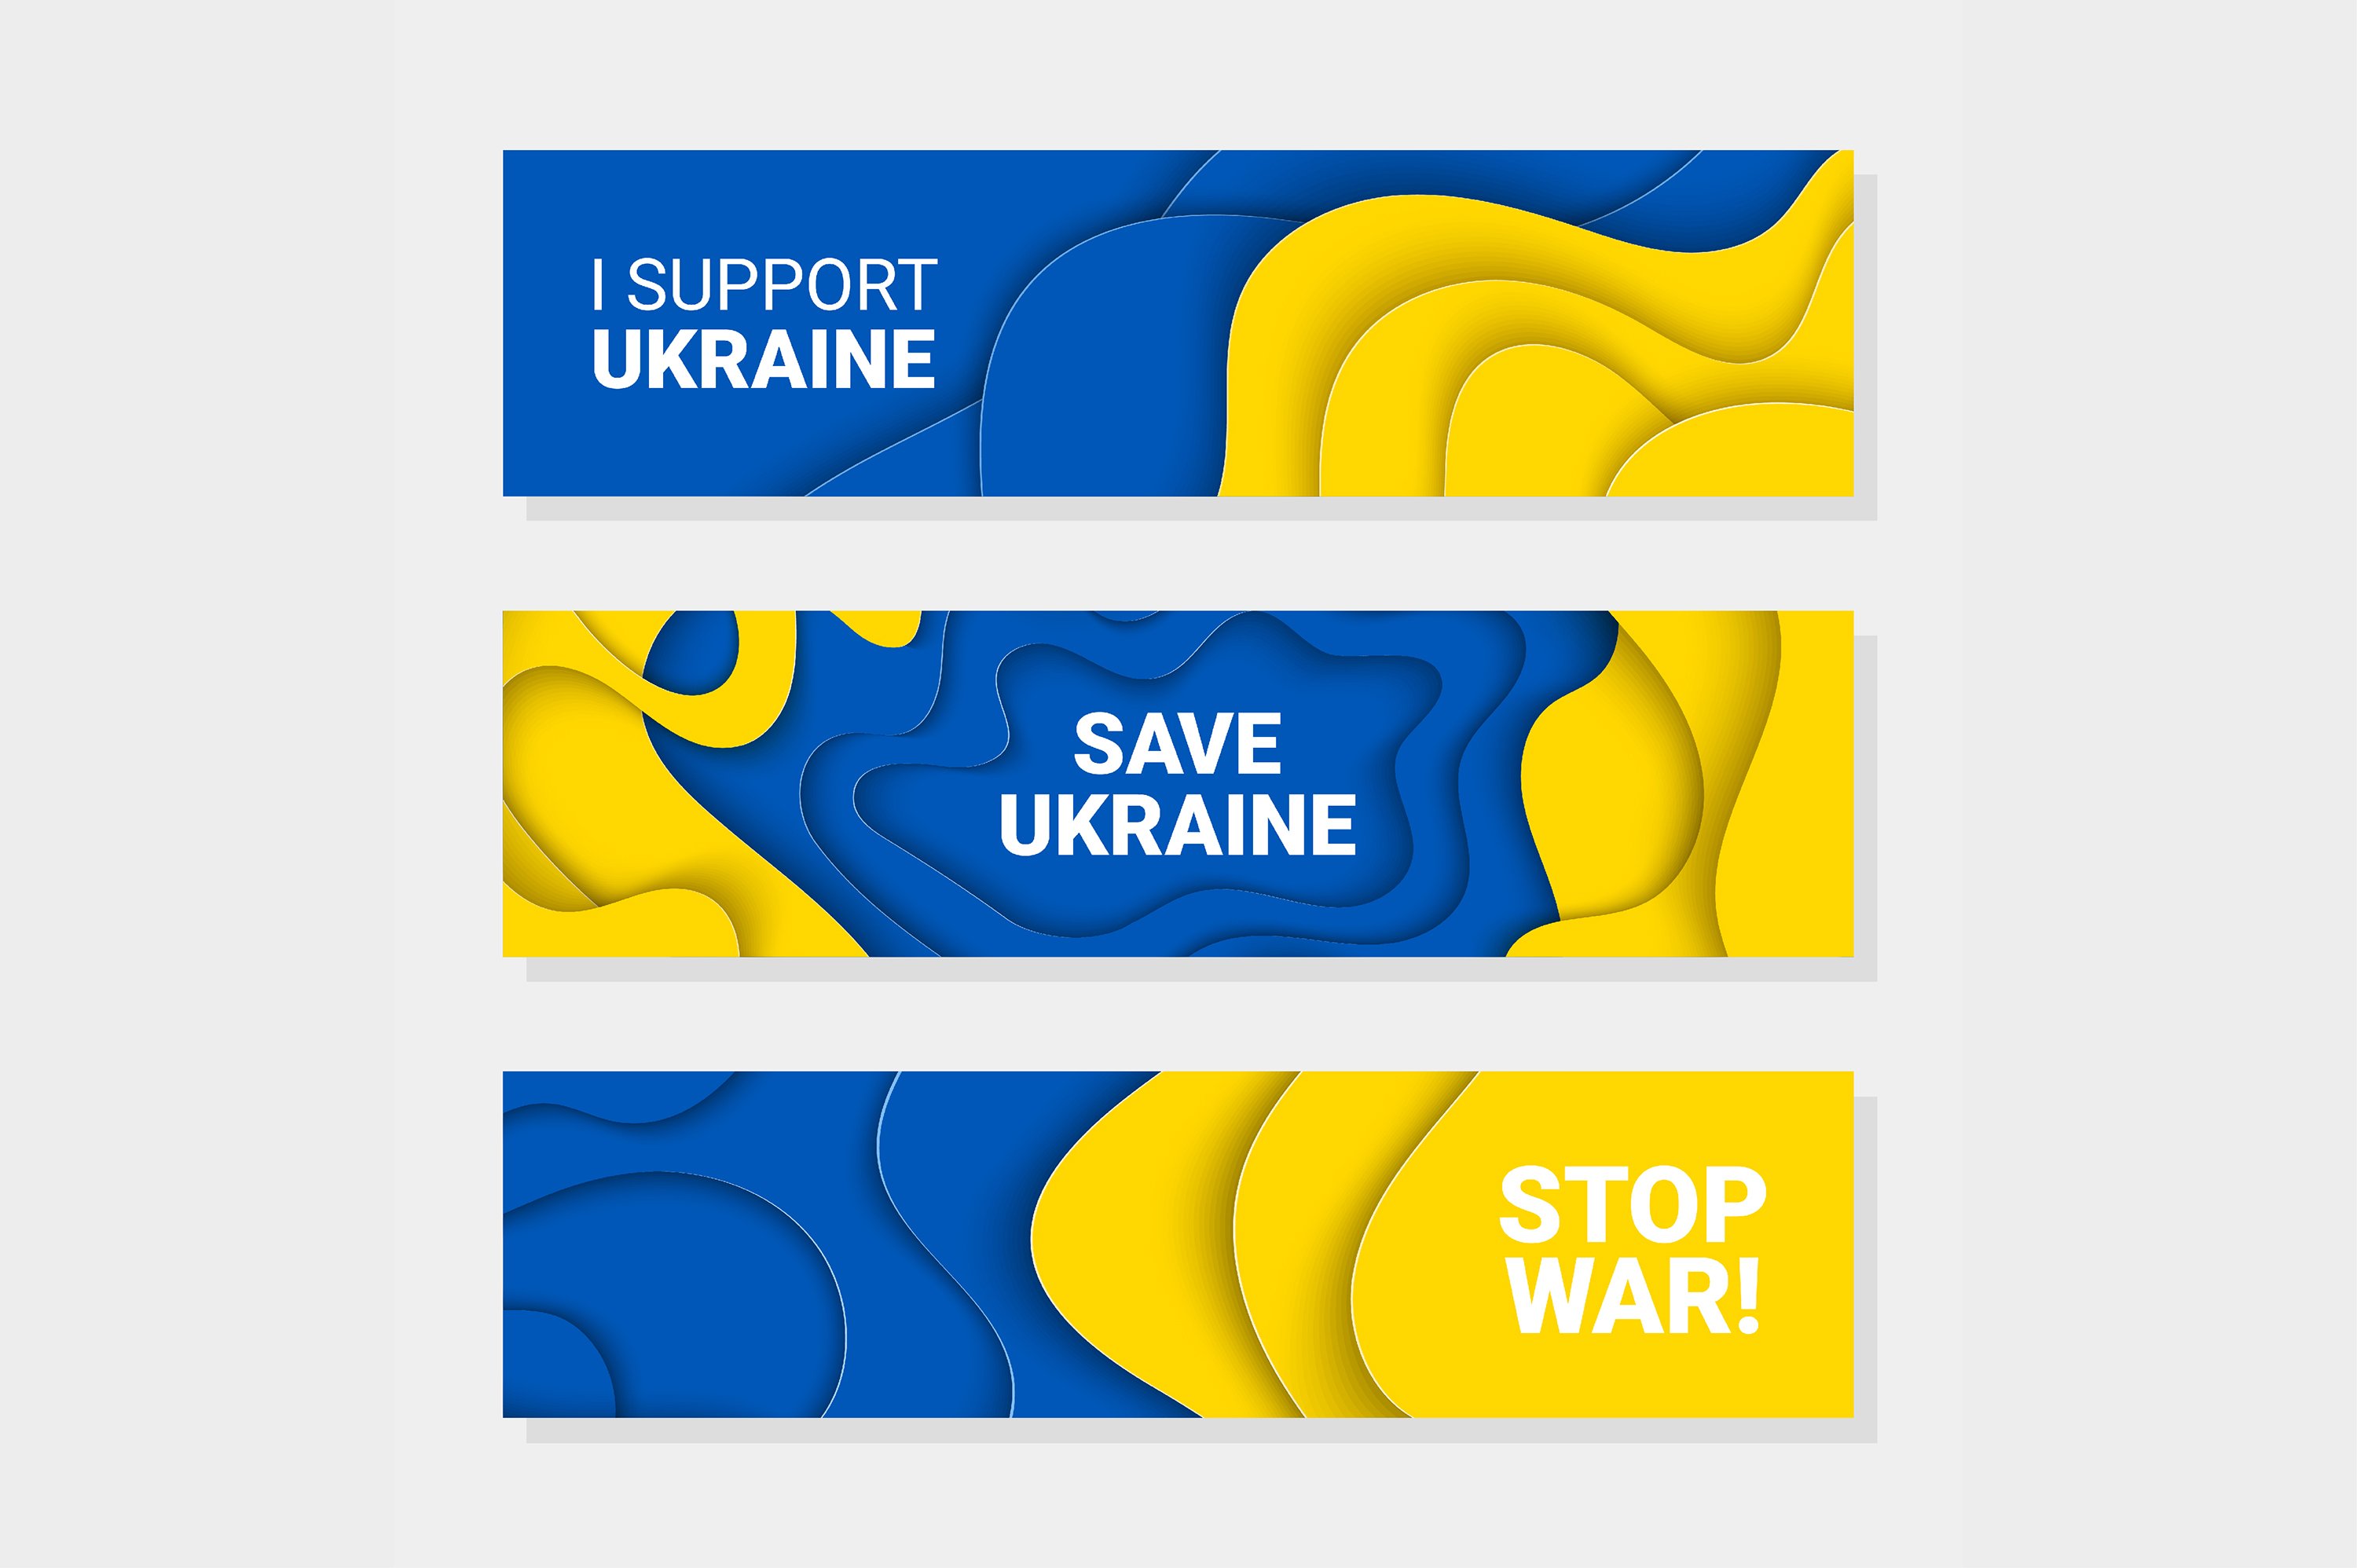 Set of three banners with a blue and yellow background.